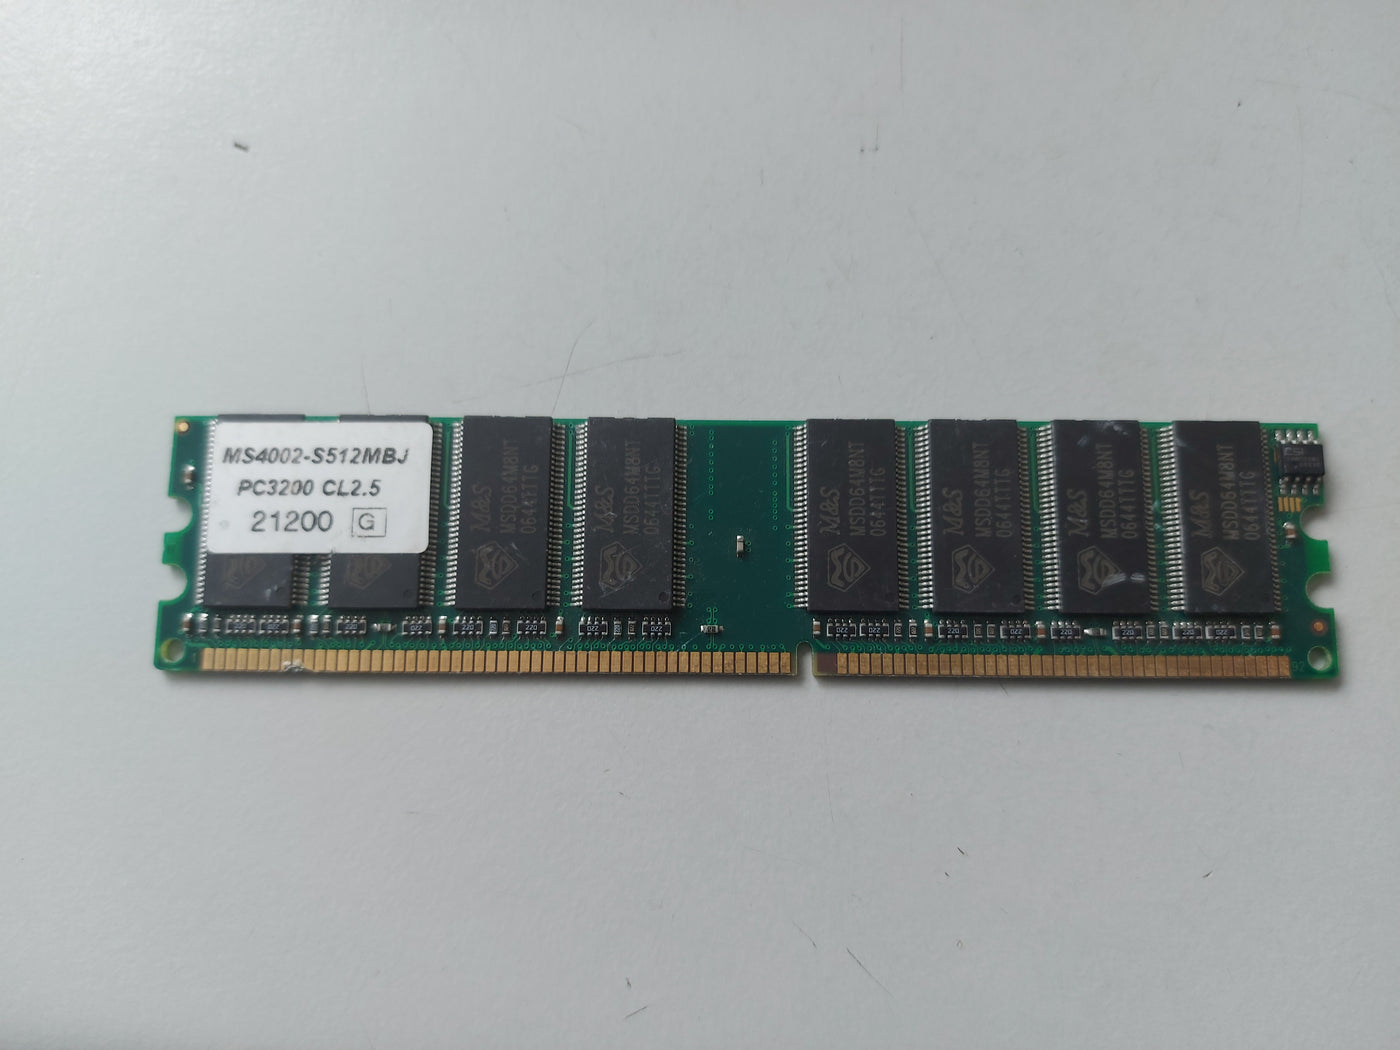 Buffalo 512MB DDR1 PC3200 400MHz CL2.5 Non-ECC 184-Pin DIMM ( MS4002-S512MBJ ) USED